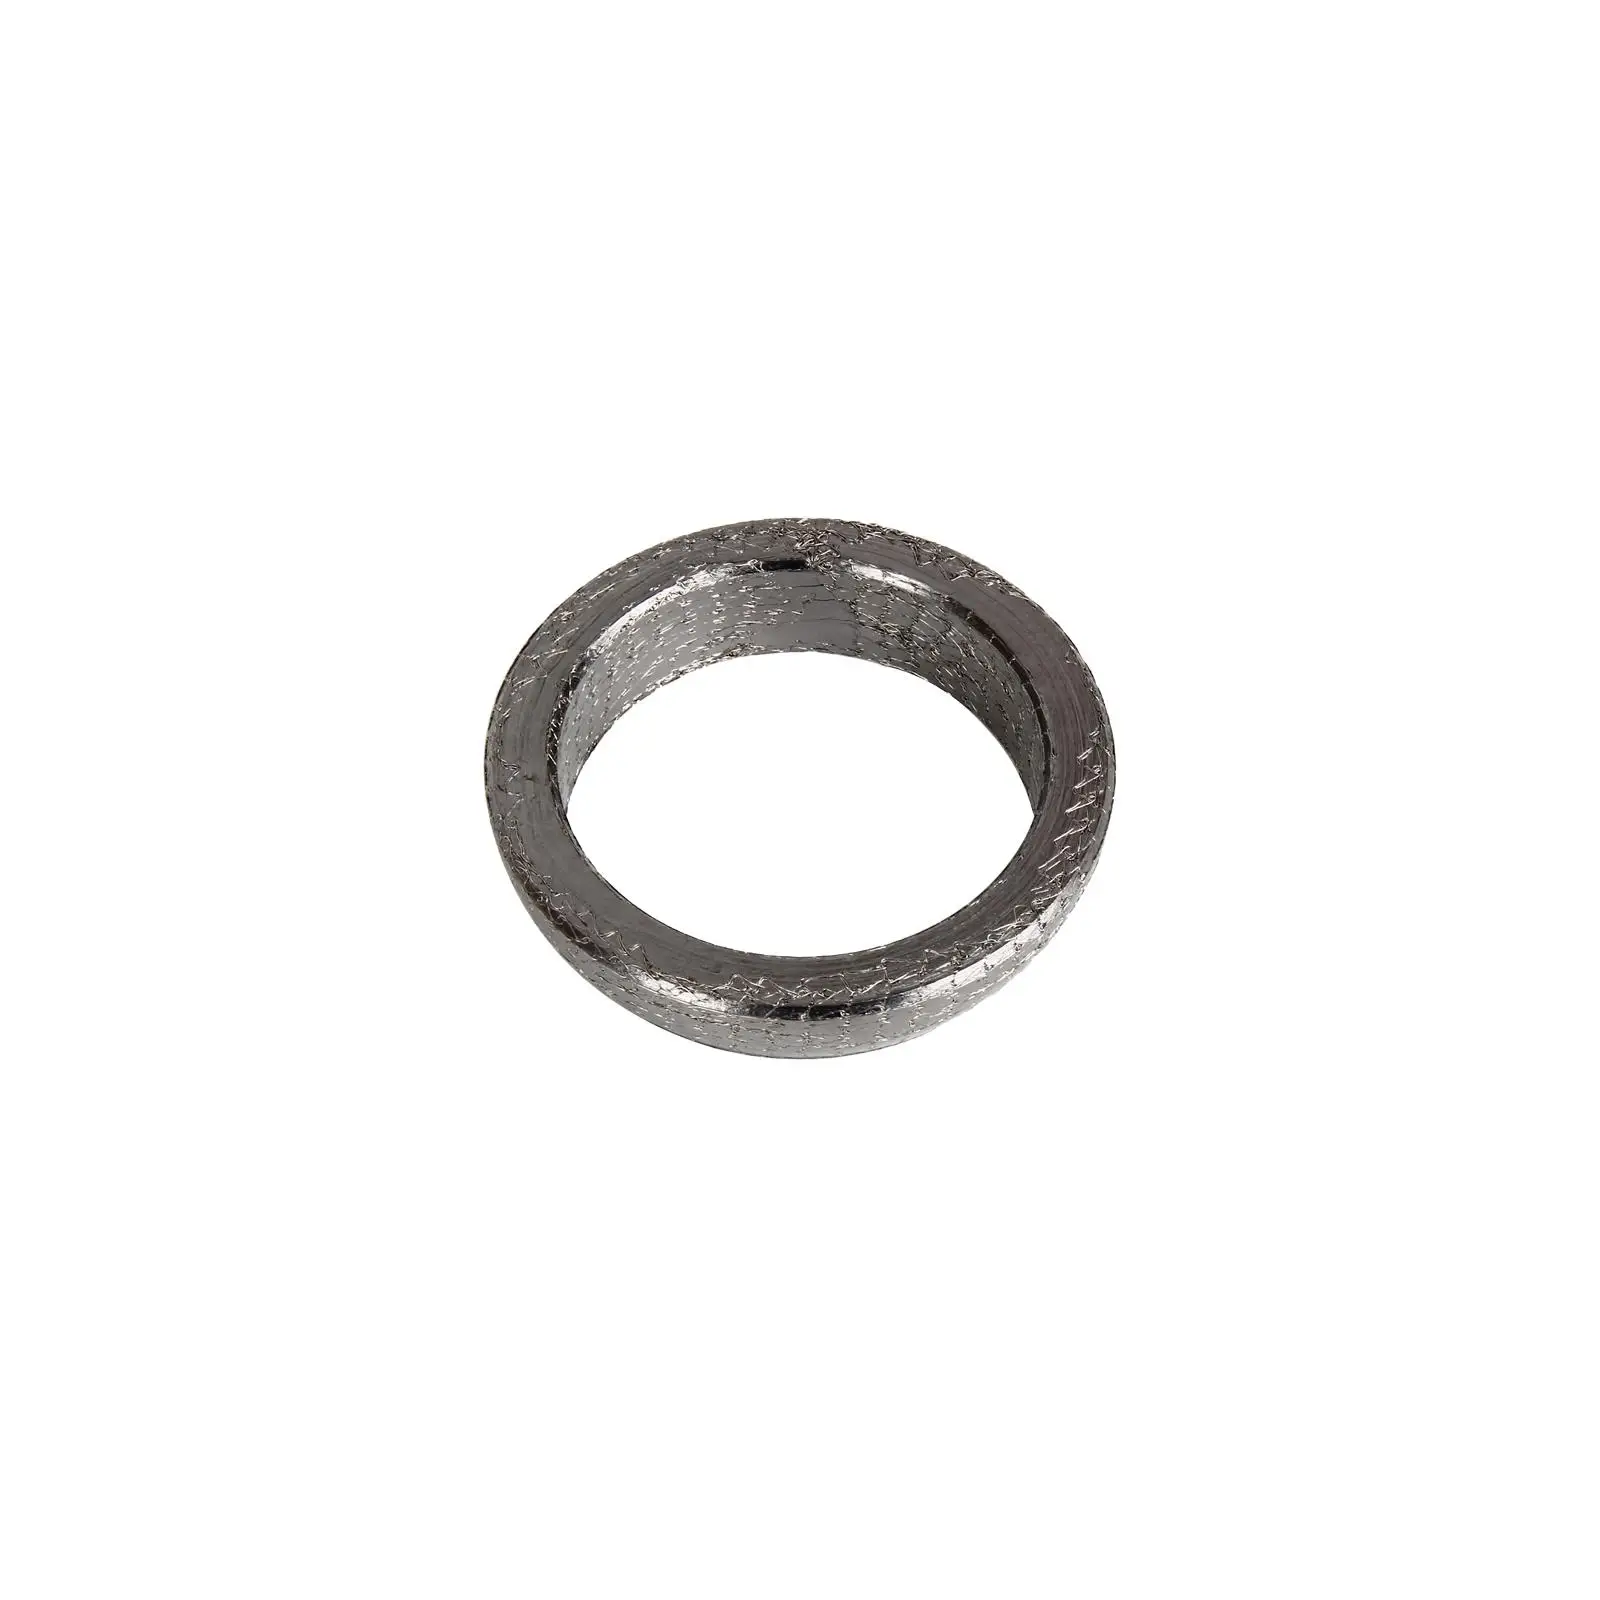 Graphite Gasket Replacements Steel Accessory to Manifold Adapter Muffler Exhaust Pipe 38mm/1.49